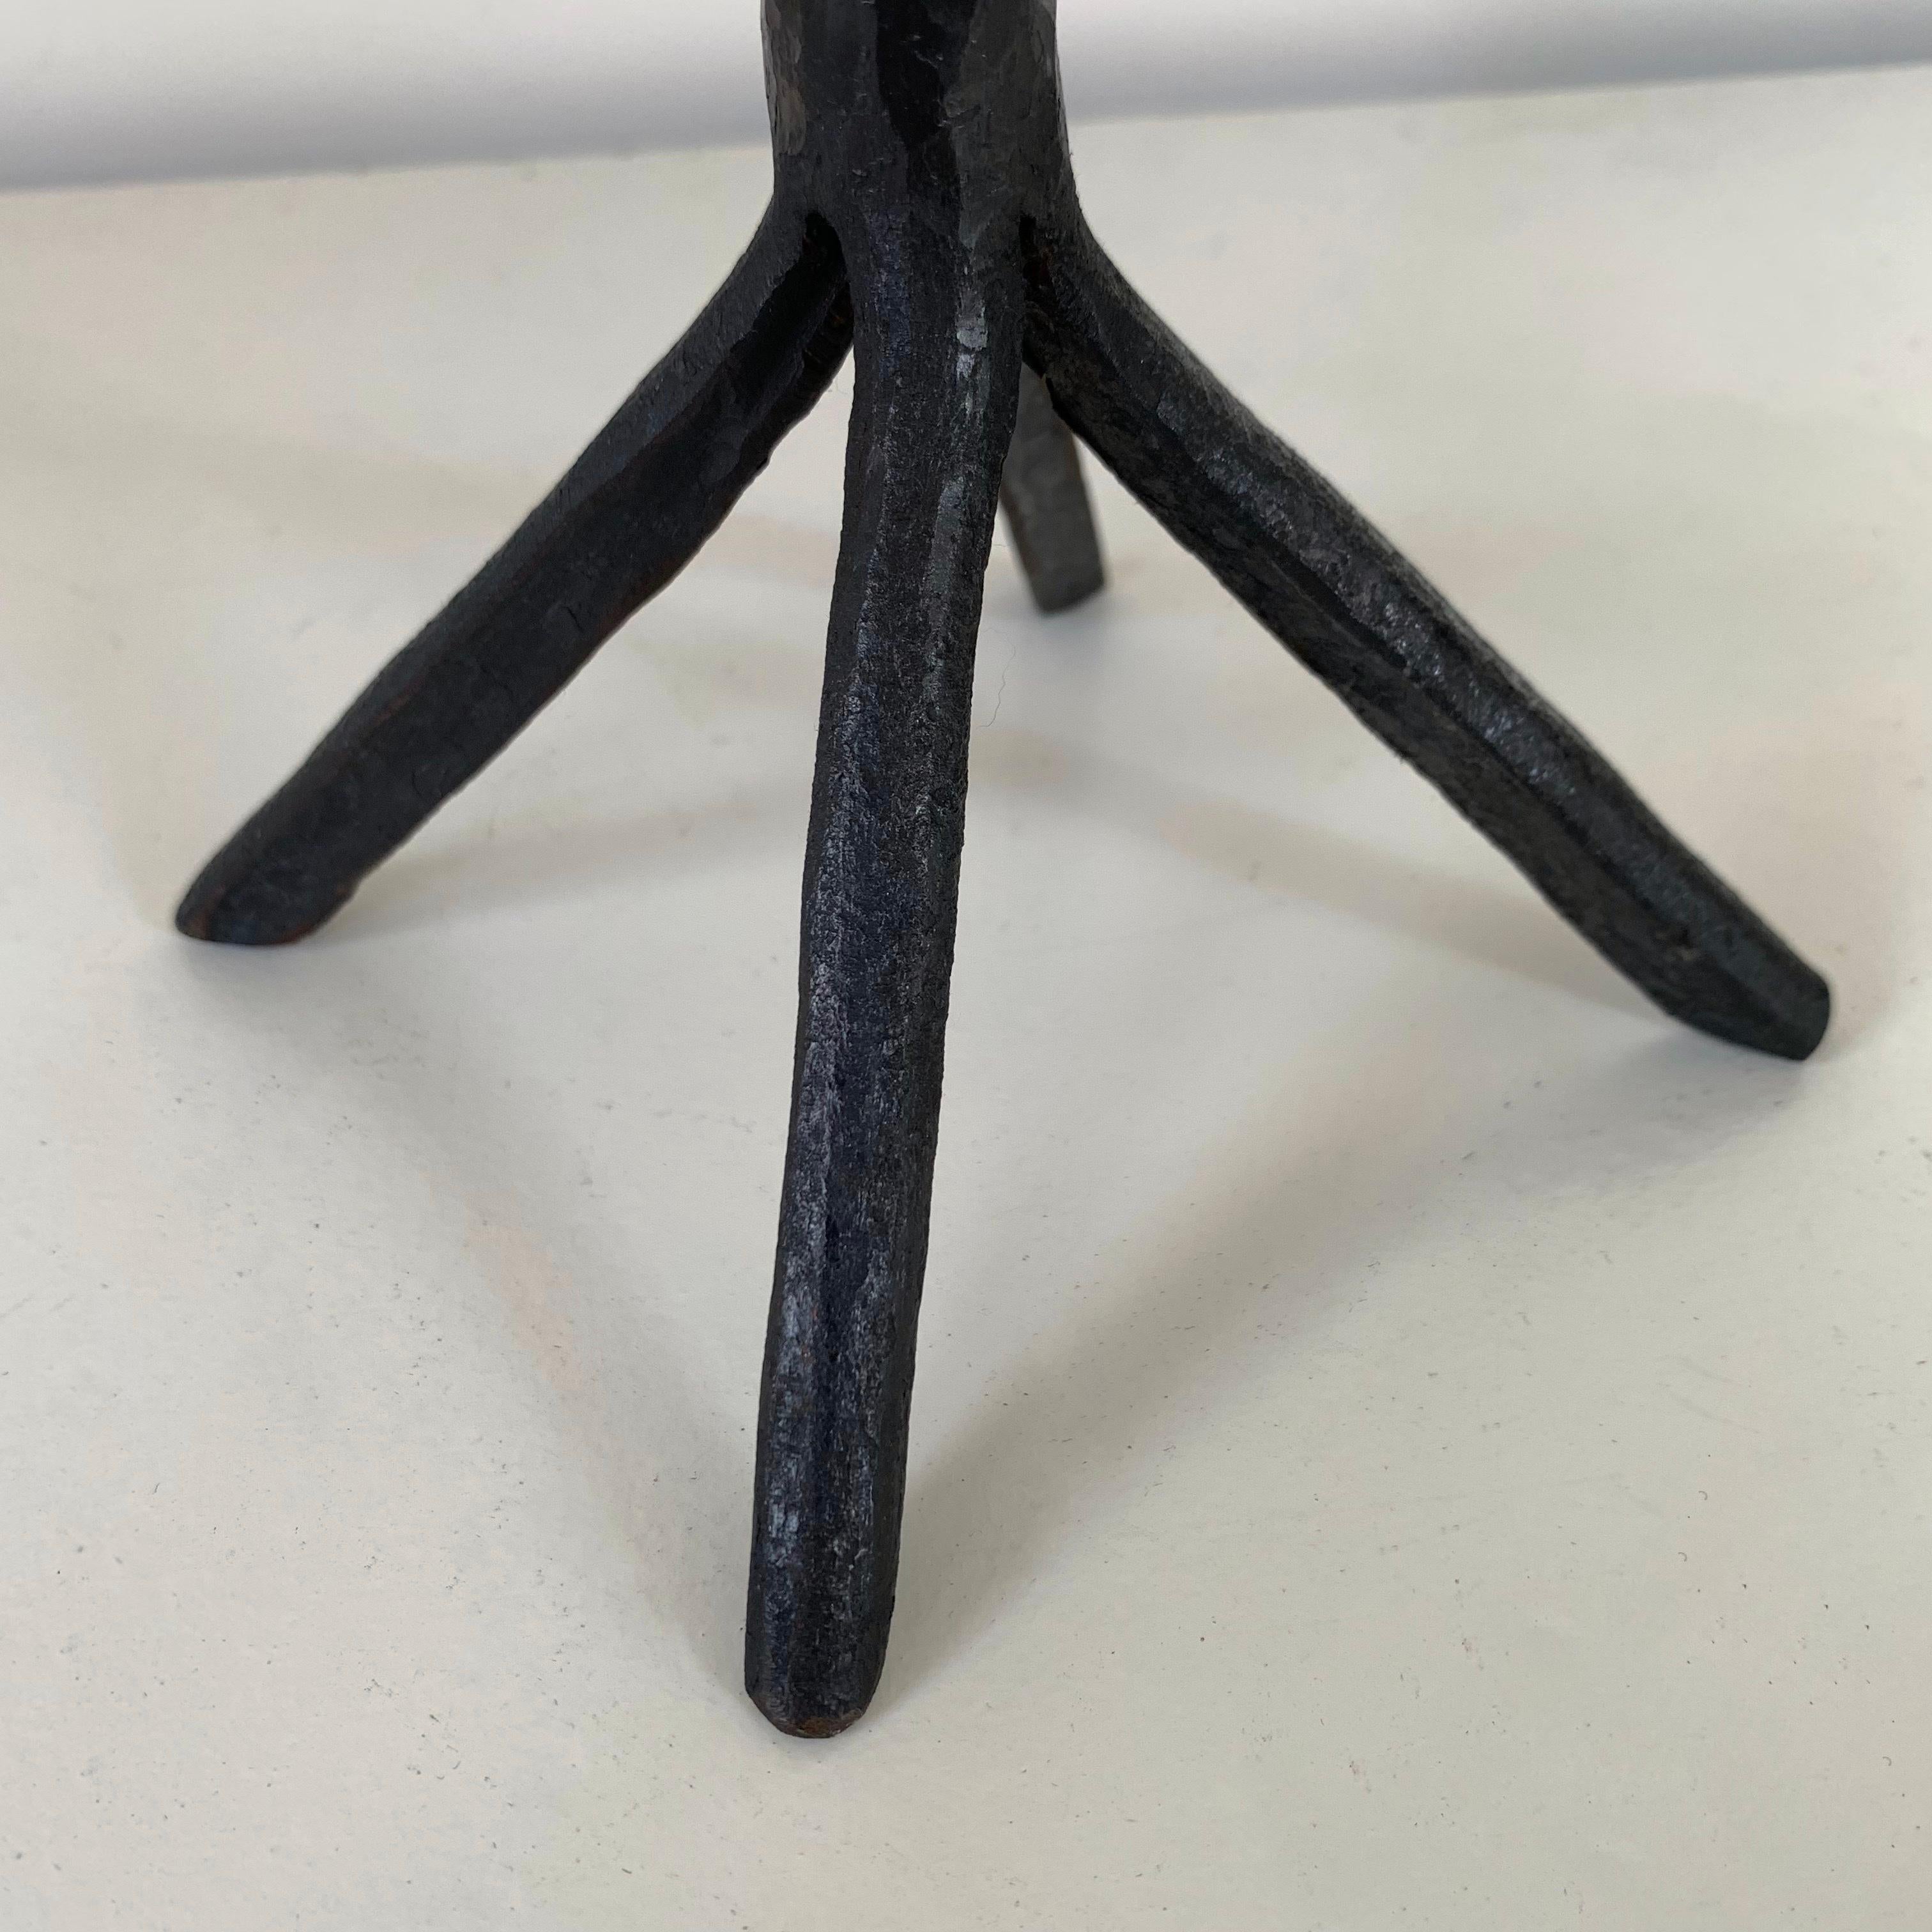 Wrought Iron Candlestick in the Style of Ateliers de Marolles, France c.1950 For Sale 10